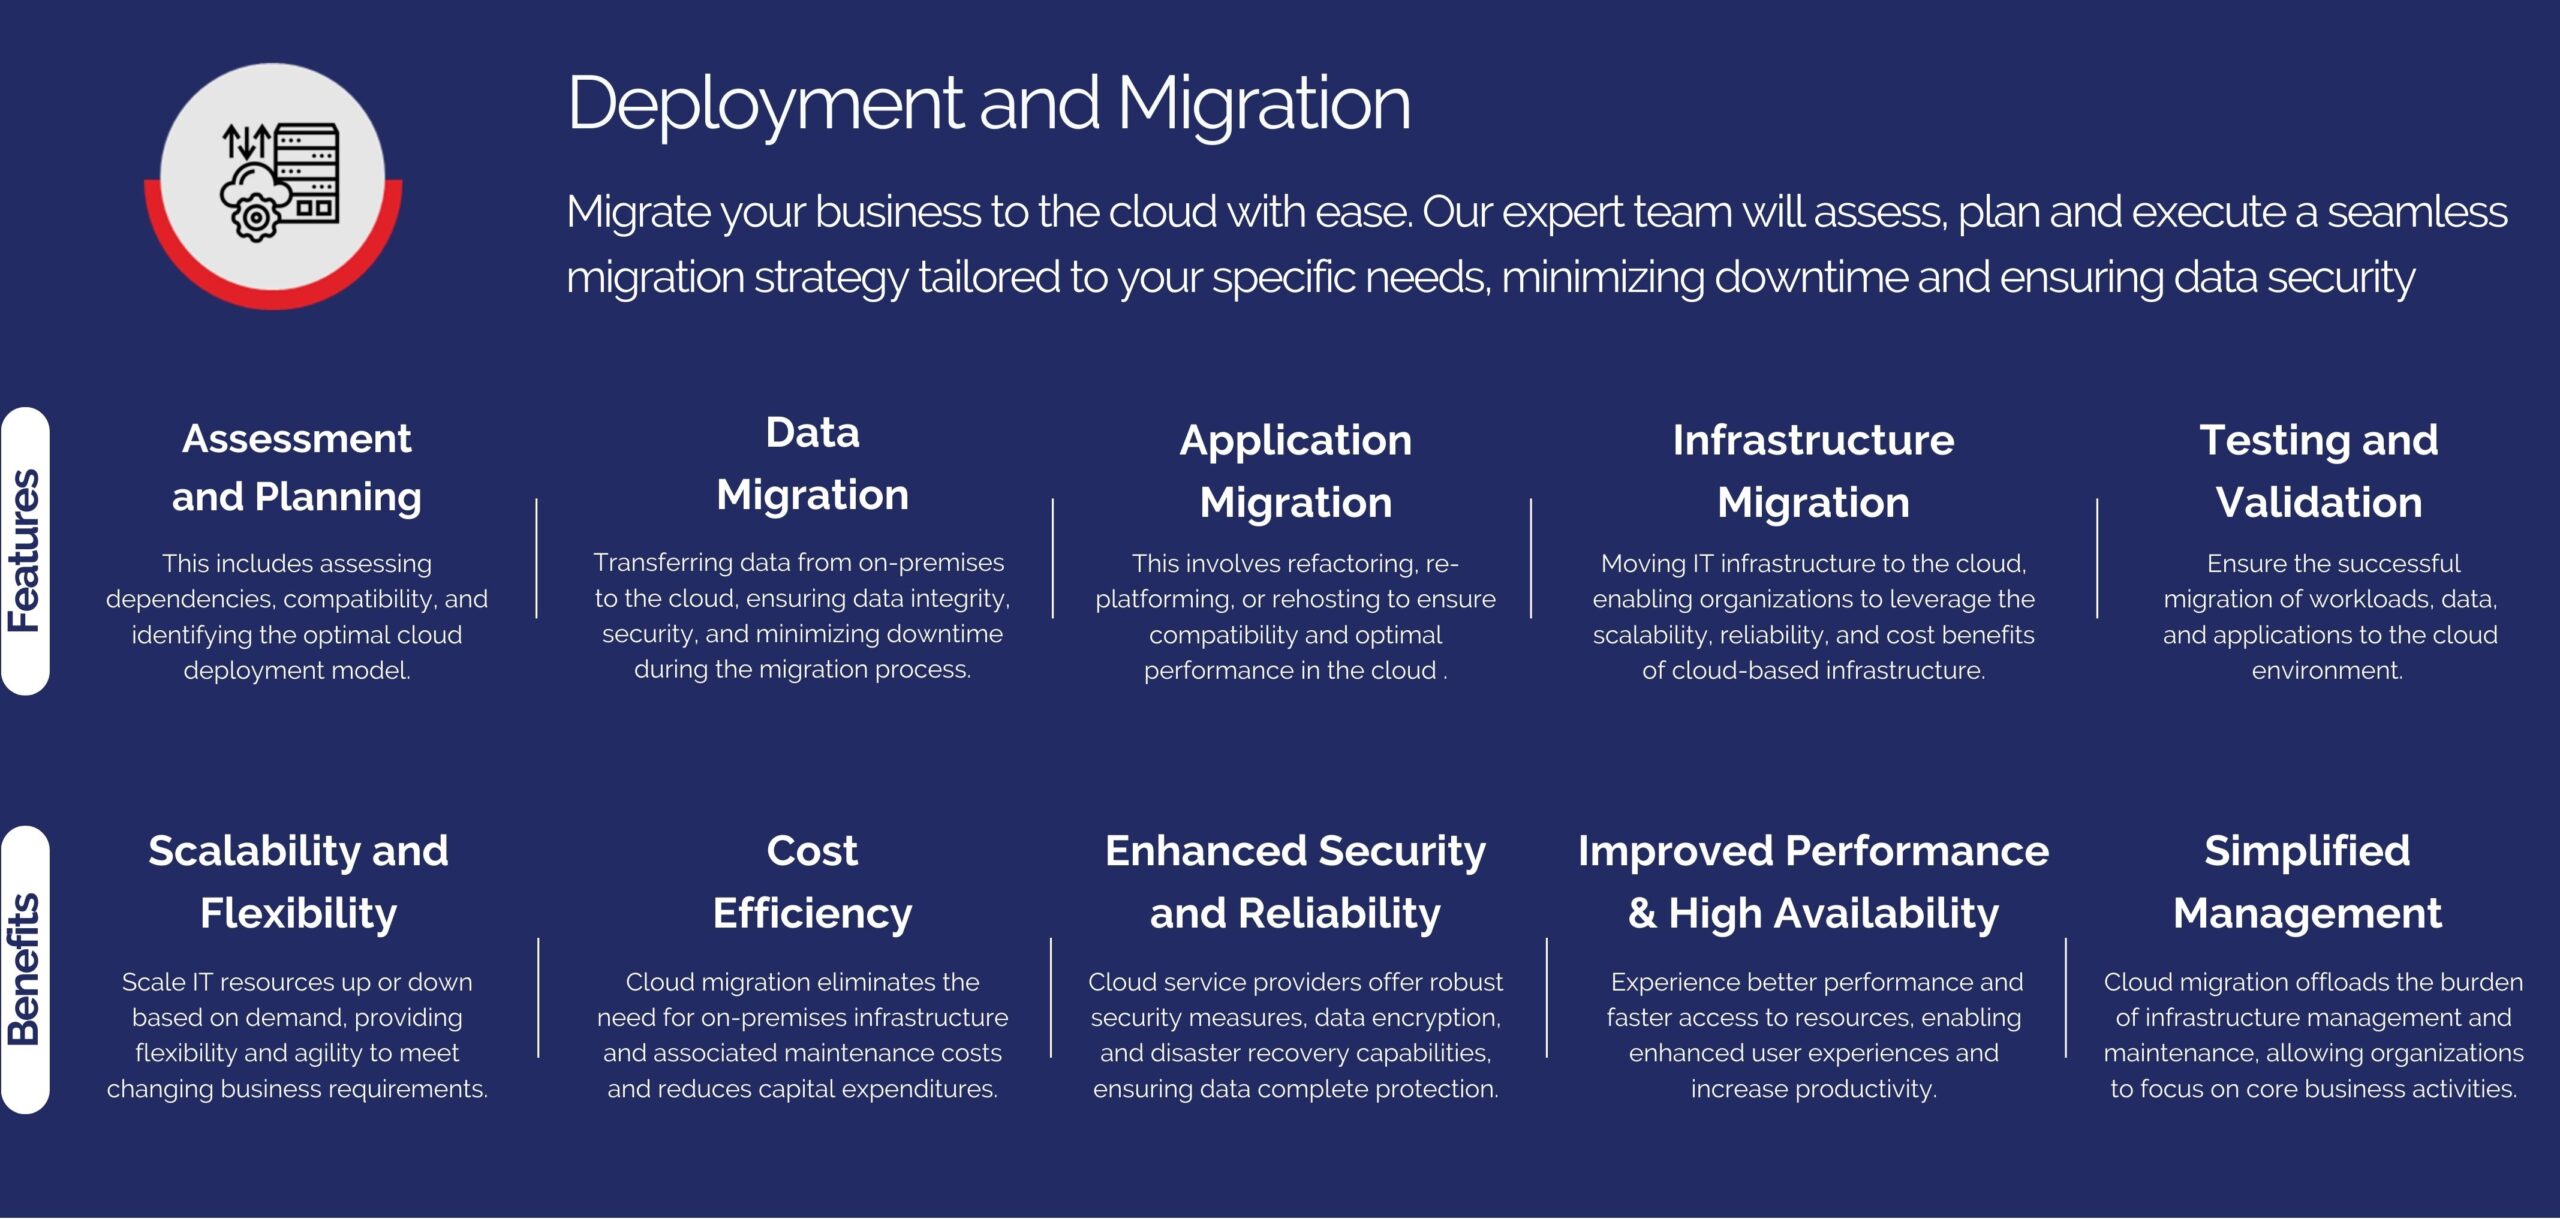 Cloud Deployment and Migration Migrate your business to the cloud with ease. Our expert team will assess, plan and execute a seamless migration strategy tailored to your specific needs, minimizing downtime and ensuring data security. Features Benefits Assessment and Planning Scalability and Flexibility Application Migration Cost Efficiency Data Migration Enhanced Security and Reliability Infrastrucuture Migration Improved Performance and High Availibility Testing and Validation Simplified Management   Solutions or Products 1. Workspace Solution Microsoft 365 and EMS (Fully Cloud or Hybrid Setup, MDM and Data Migration) 2. VDI Solutions ( AWS and Azure VDI) 3. IAM and SSO (AWS IAM and Azure AD Premium)